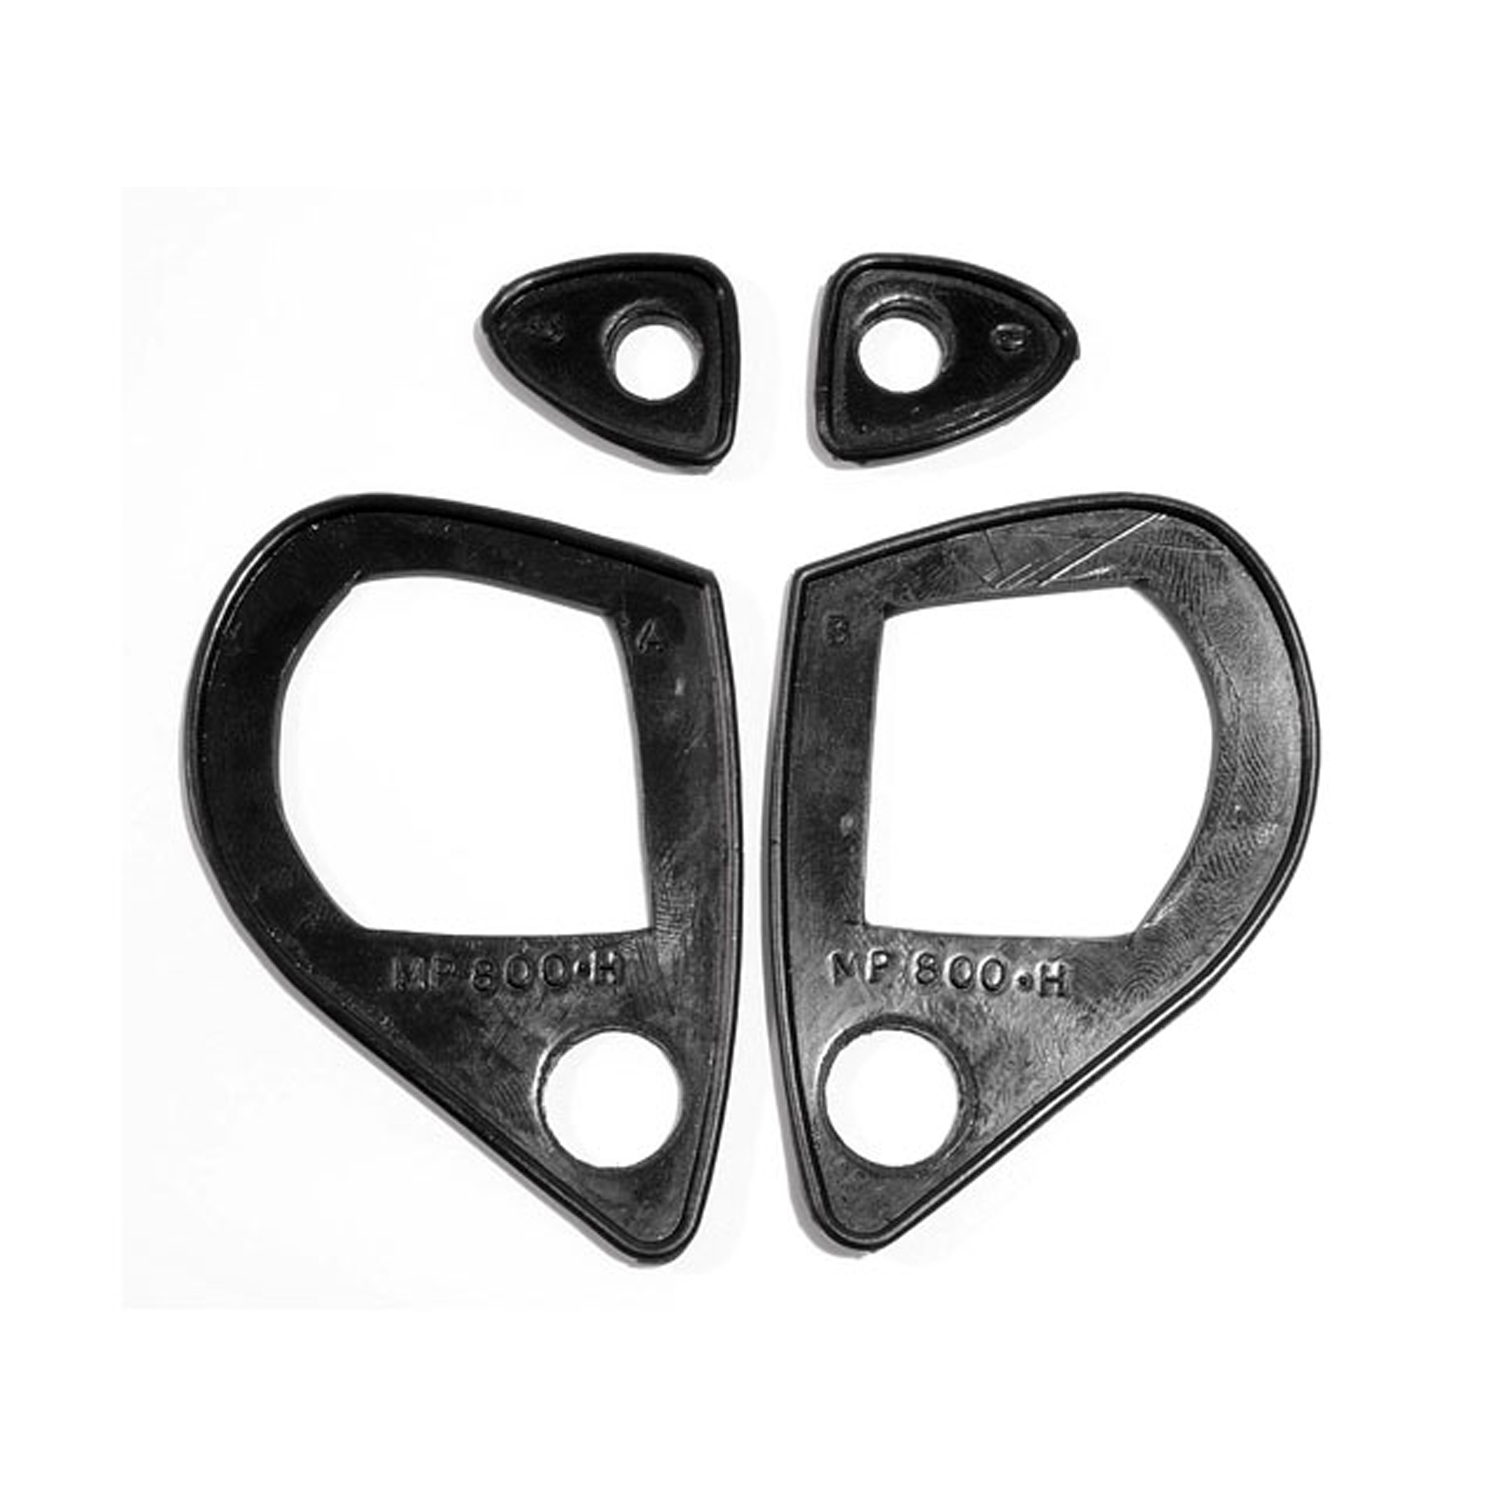 1964 Ford Club Wagon Door Handle Pads.  Replaces OEM #C34Z6222428A-9A-MP 800-H